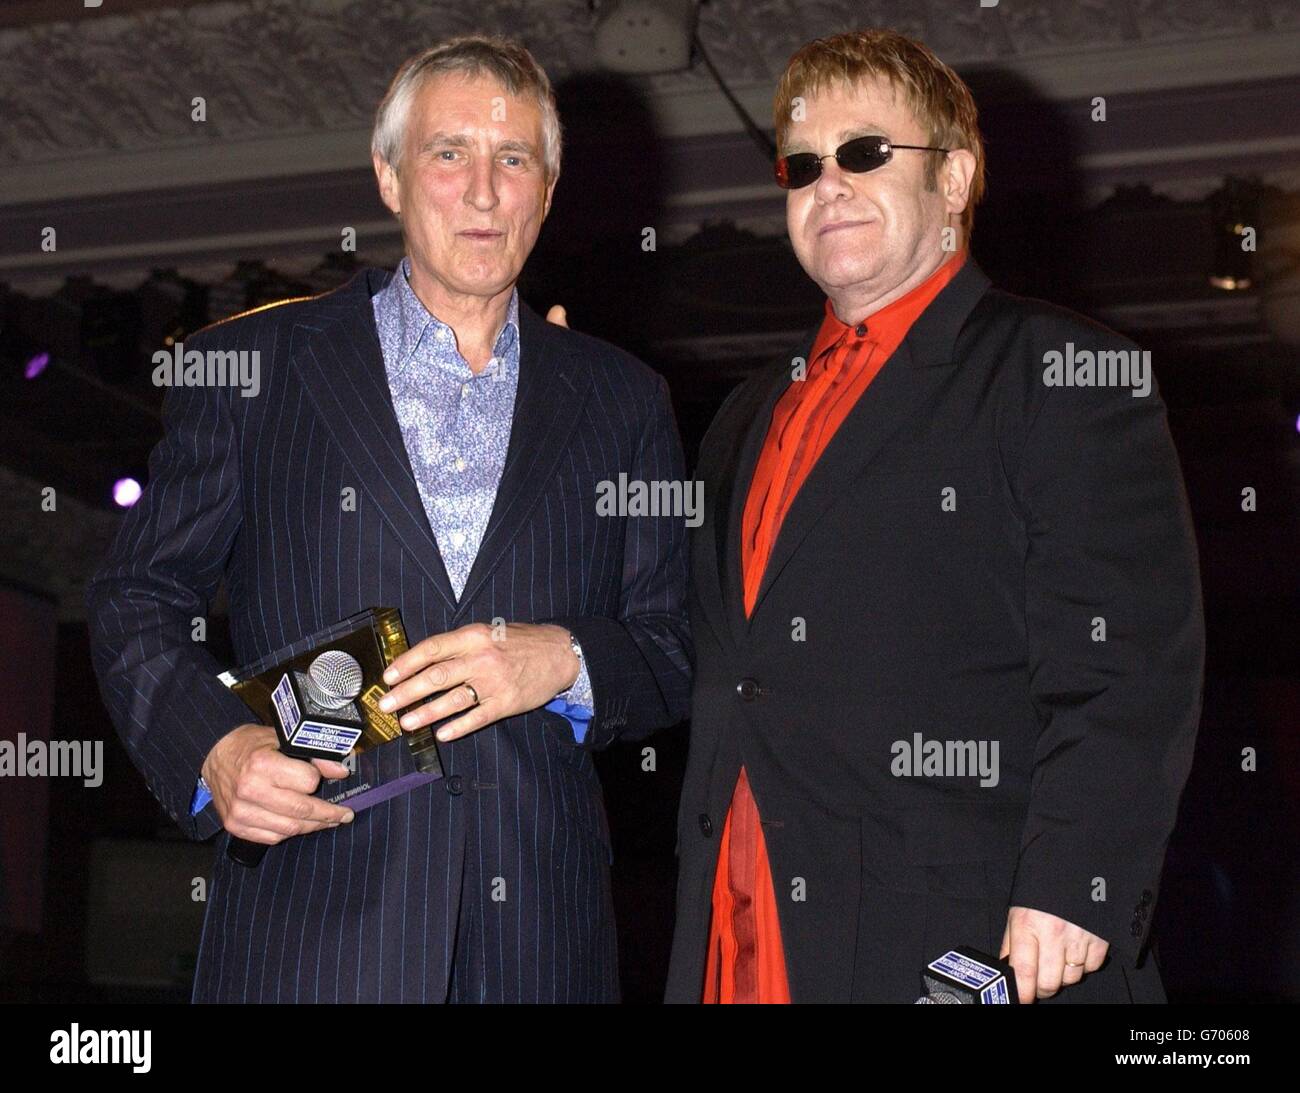 Sir Elton John (right) presents the Gold Award to Radio 2 DJ Johnnie Walker, on stage during the Sony Radio Academy Awards 2004, held at Grosvenor House hotel on Park Lane, London. The ceremony saw Jonathan Ross and Radio 1's Chris Moyles lose out to Xfm's Christian O'Connell, who was named DJ of the Year. Stock Photo